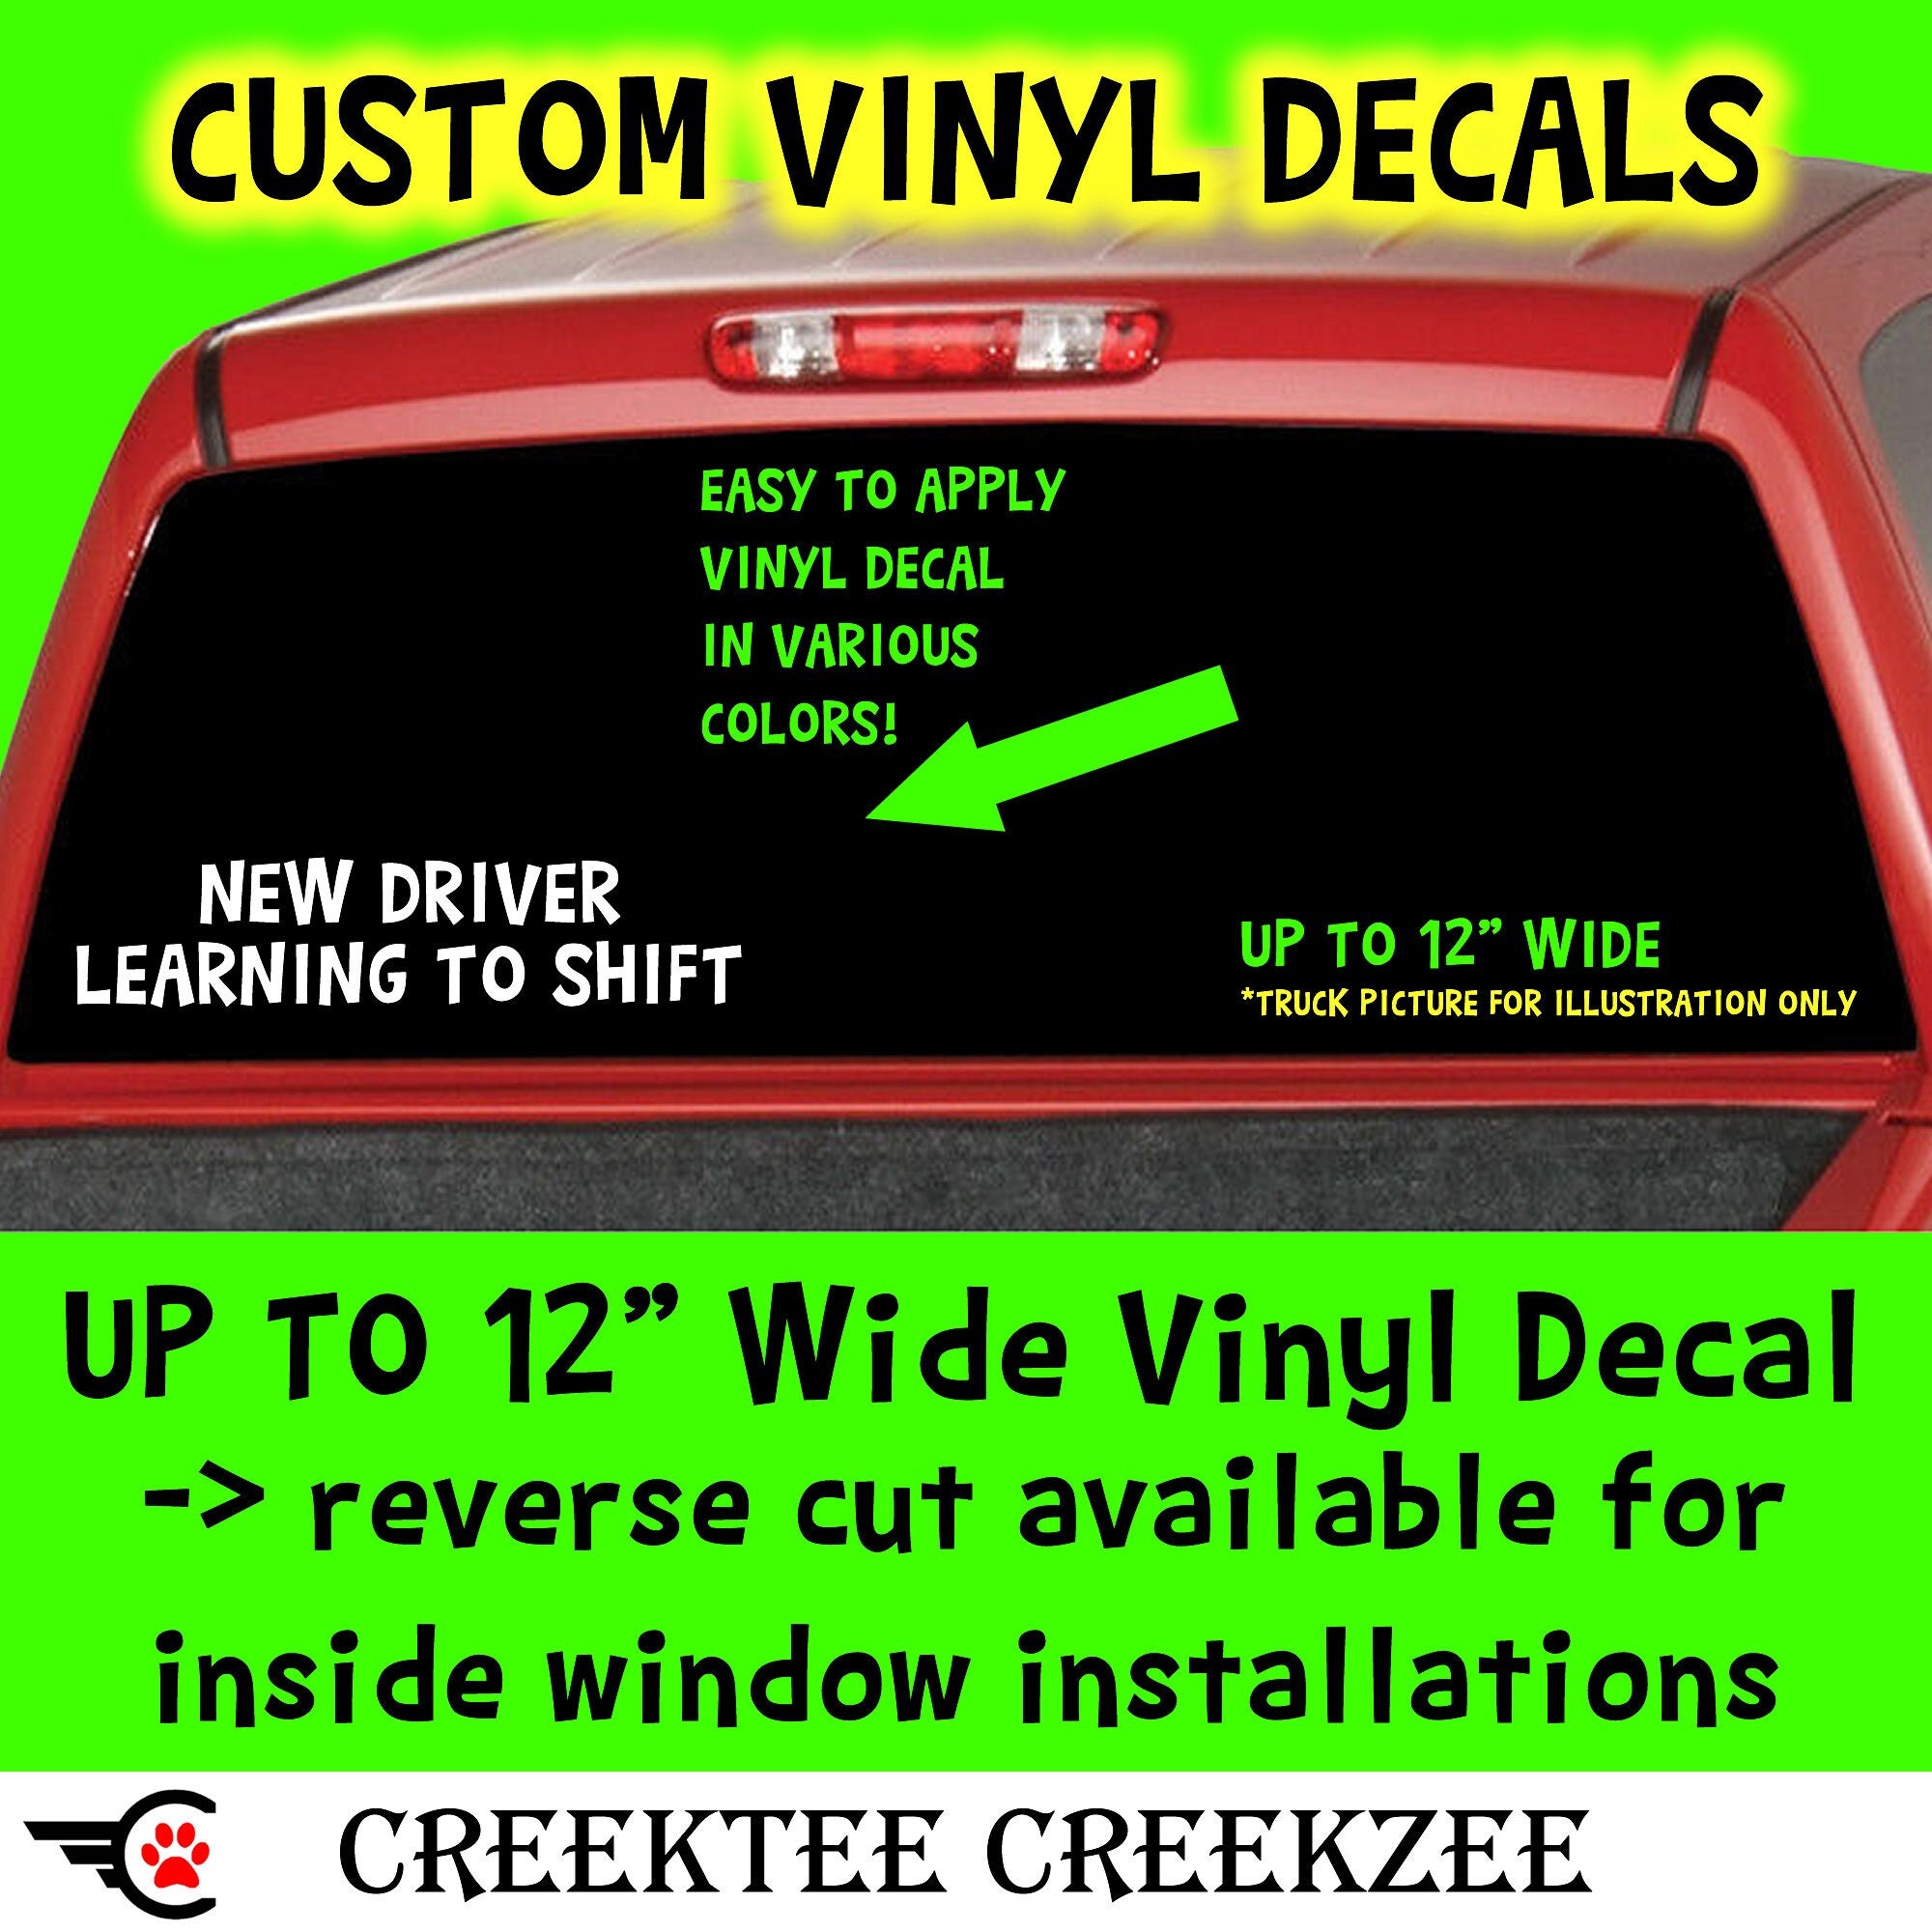 New driver learning to shift Decal in Color Vinyl Various Sizes and Colors Die Cut Vinyl Decal also in Cool Chrome Colors!